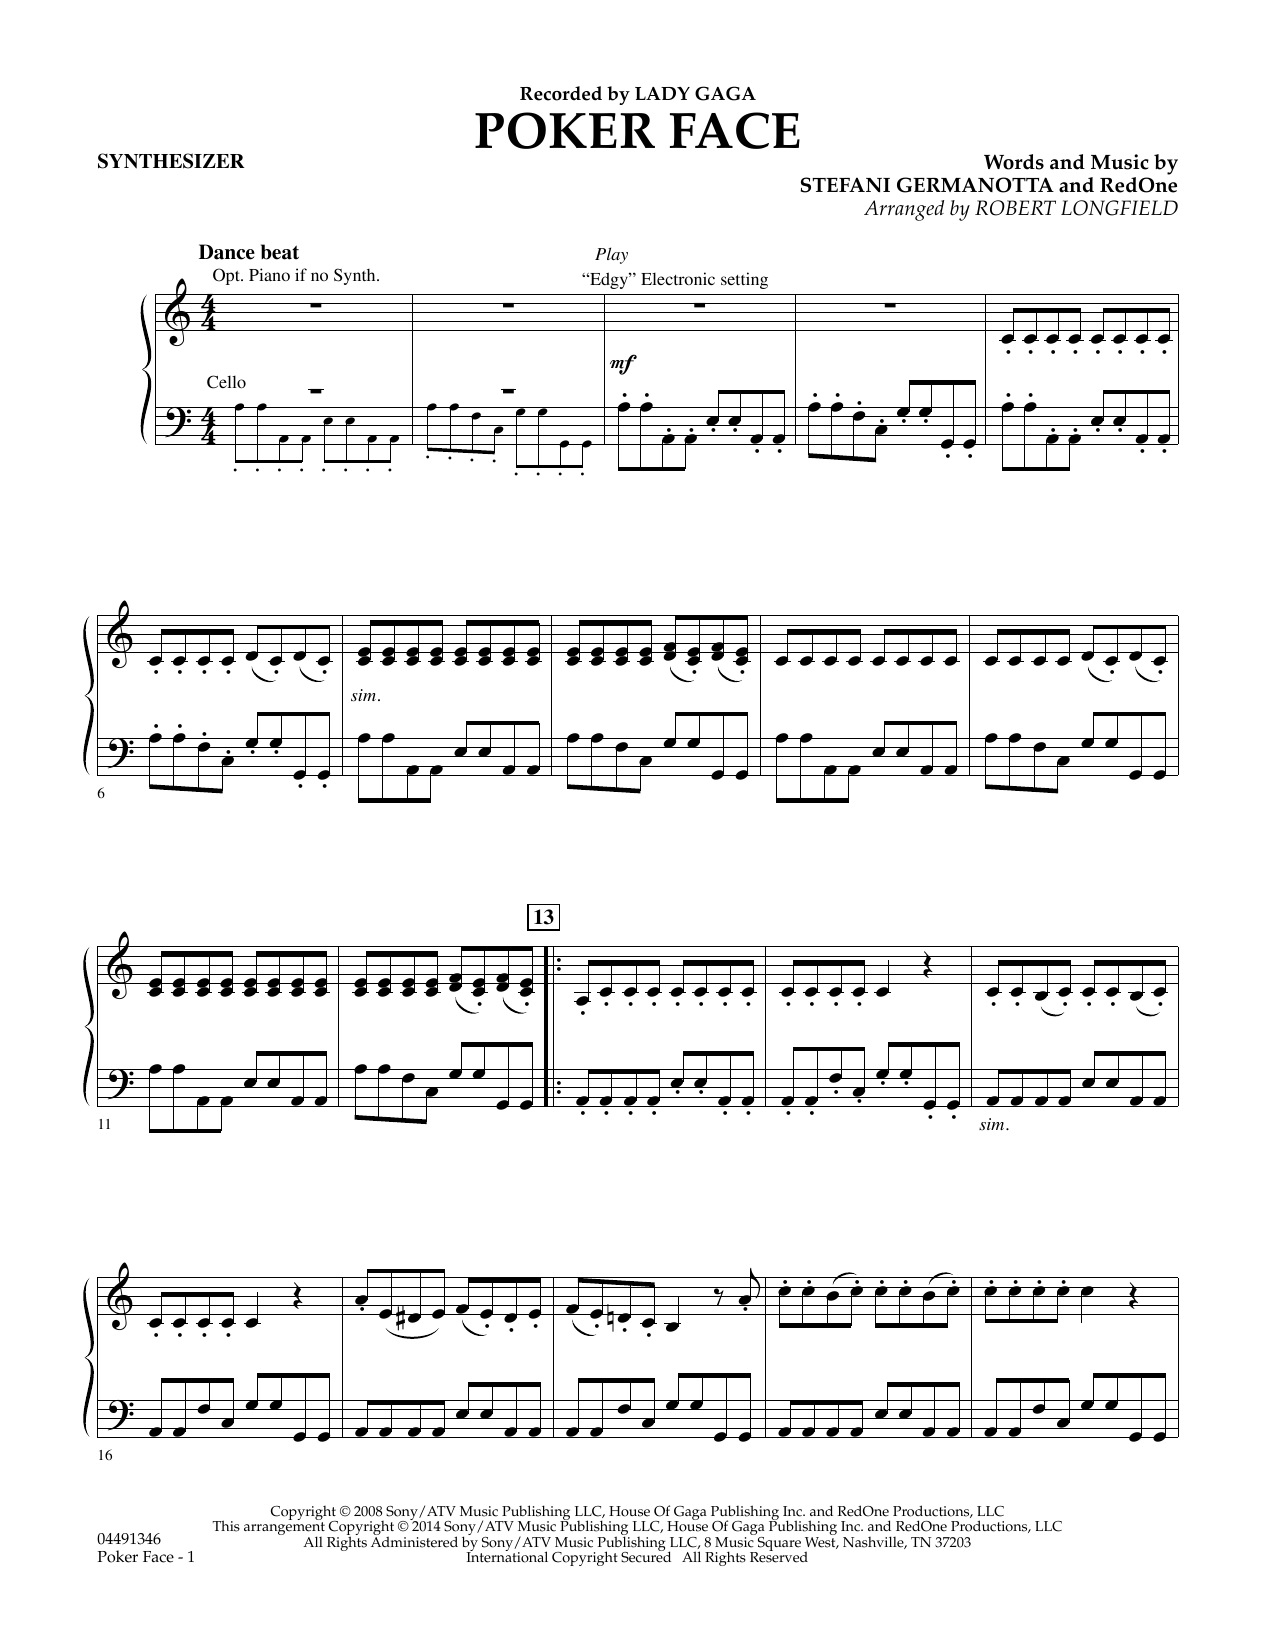 Robert Longfield Poker Face - Synthesizer sheet music notes and chords. Download Printable PDF.